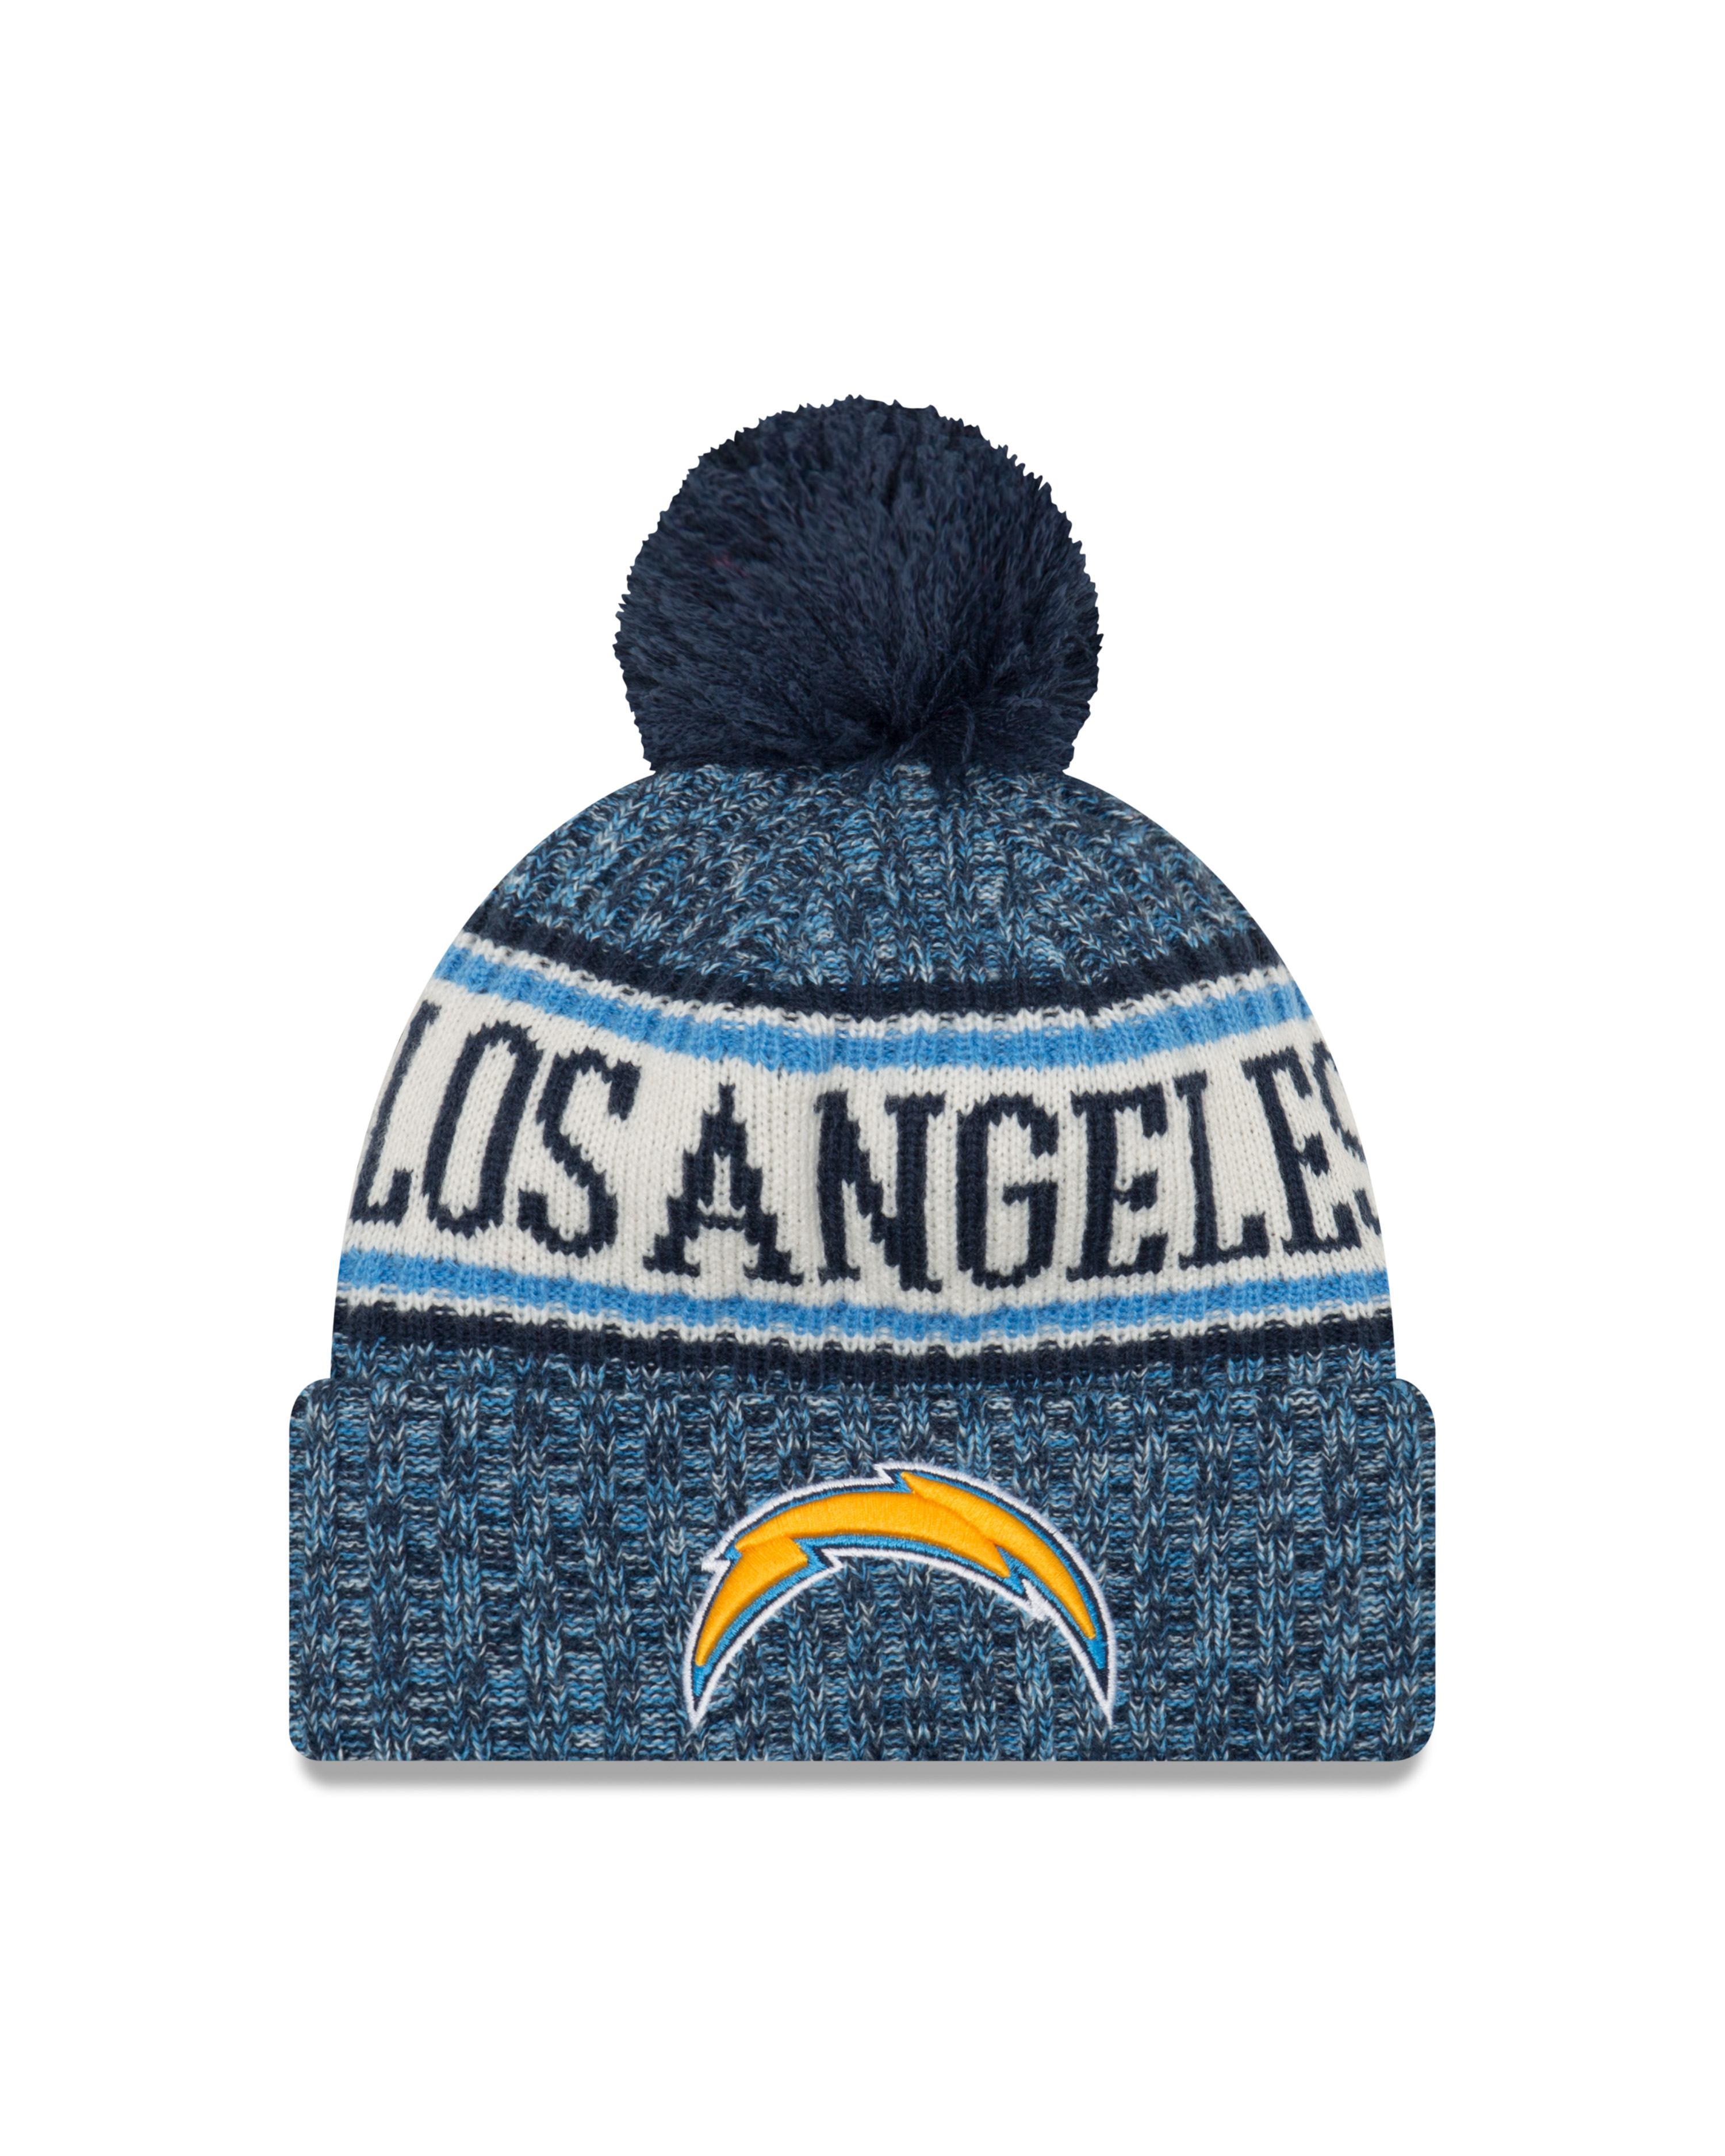 New Era Official NFL Cold Weather Collection #47